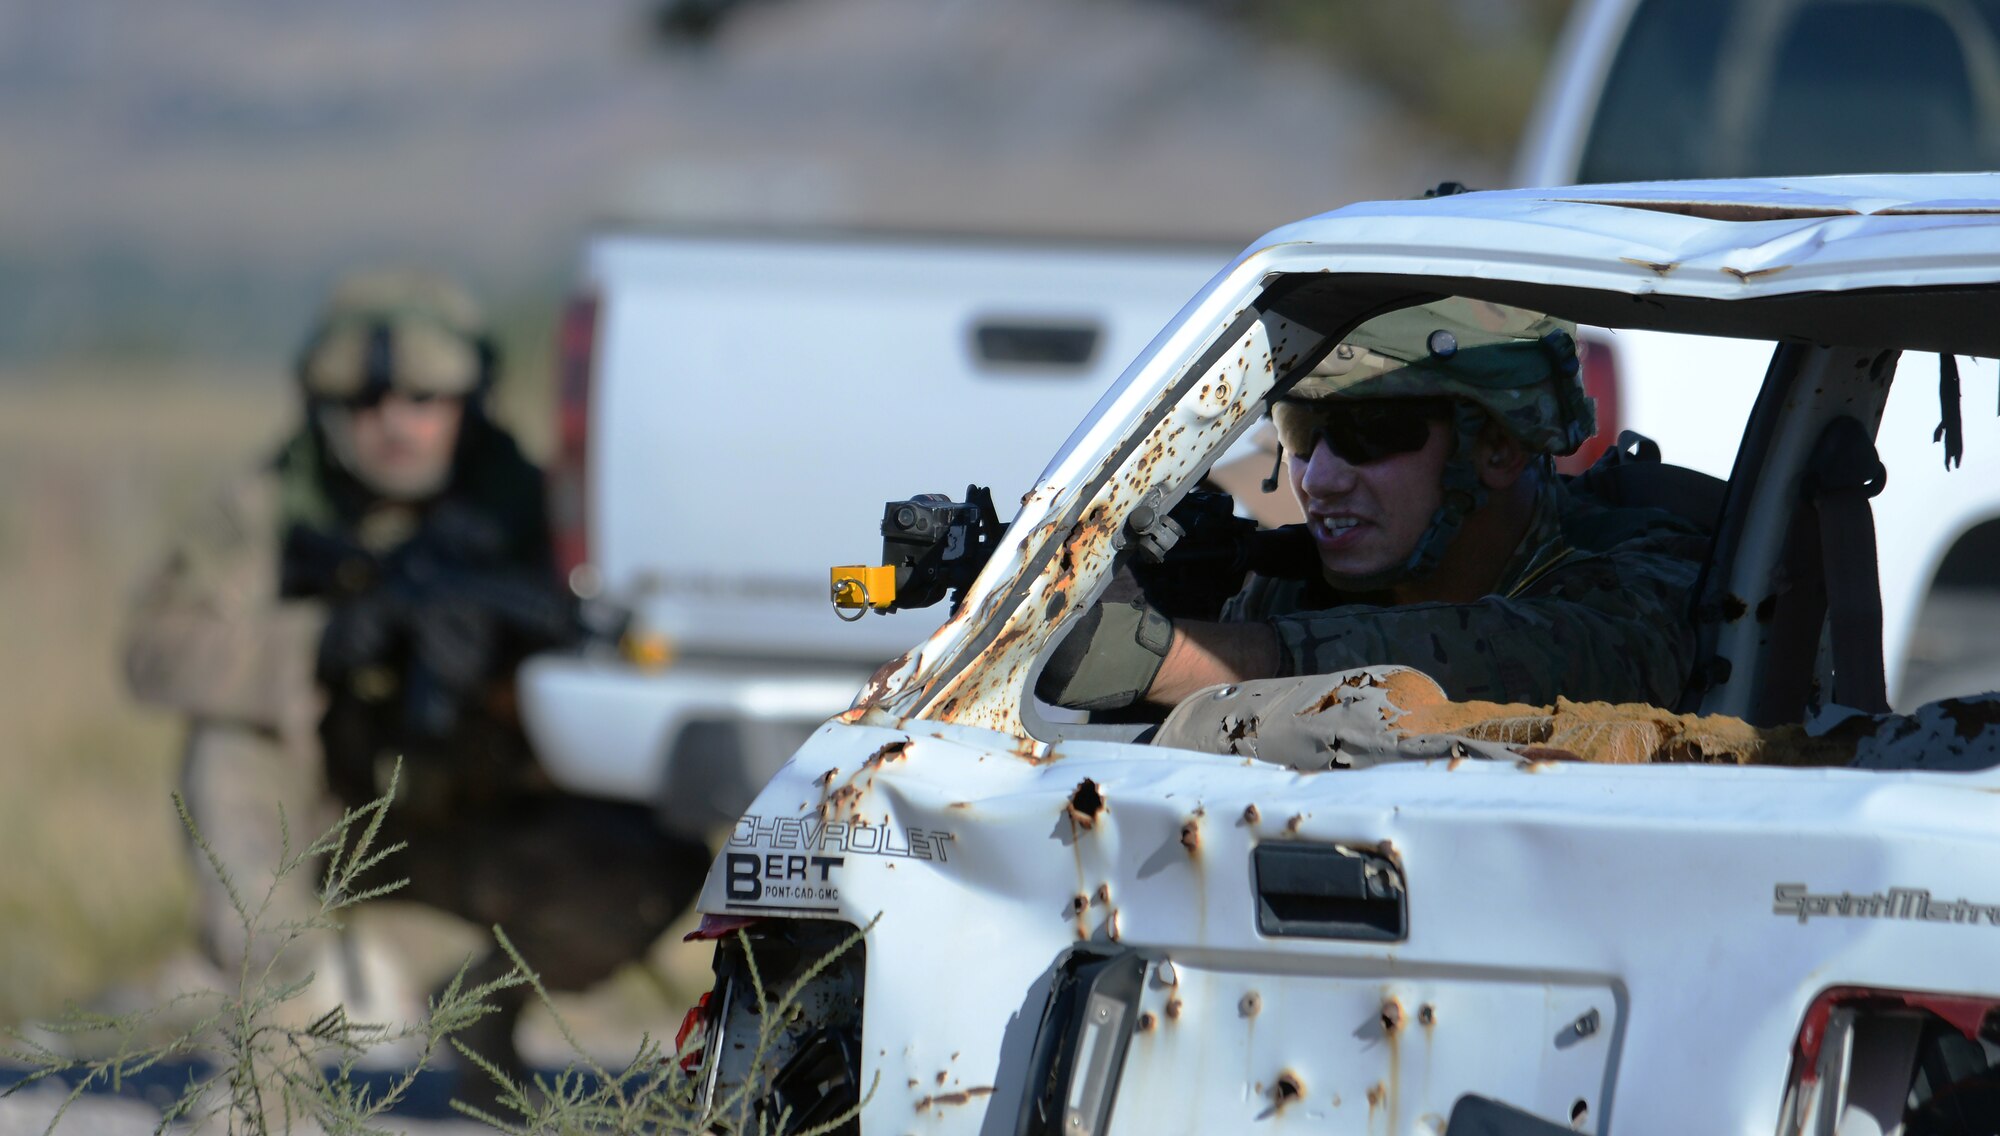 Senior Airman Brandon Weese, 91st Missile Squadron, Minot Air Force Base, N.D., uses a car for cover while Staff Sgt. Jesse Koritar, 91st MW, prepares to move to a different cover during the tactical recapture portion of the 2015 Global Strike Challenge security forces competition on Camp Guernsey, Wyo., Sept. 24, 2015. Each five-man team had to work together to infiltrate a town and recapture a missing asset while opposing forces worked to stop them. (U.S. Air Force photo by Senior Airman Brandon Valle)